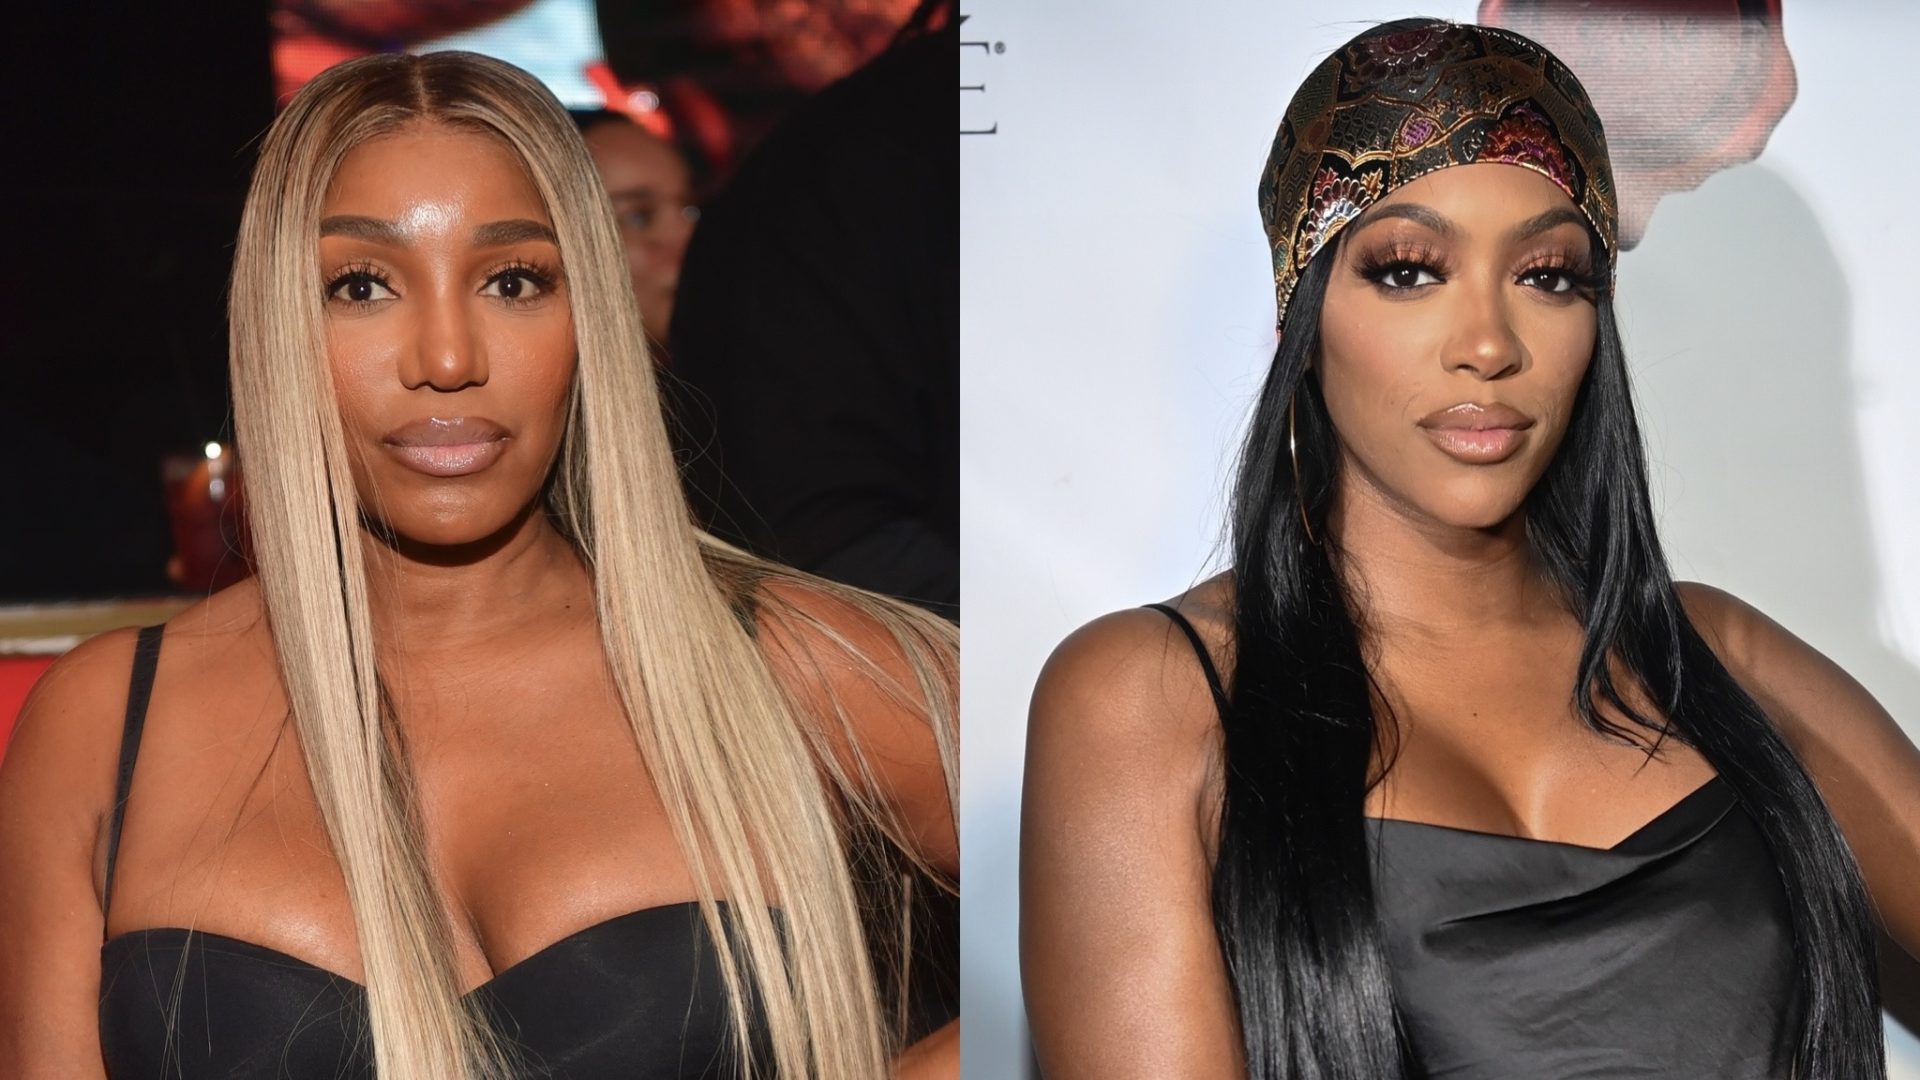 Oop! NeNe Leakes Accuses Porsha Williams Of Refusing To Work With Her In Upcoming Sitcom Appearance (WATCH) thumbnail